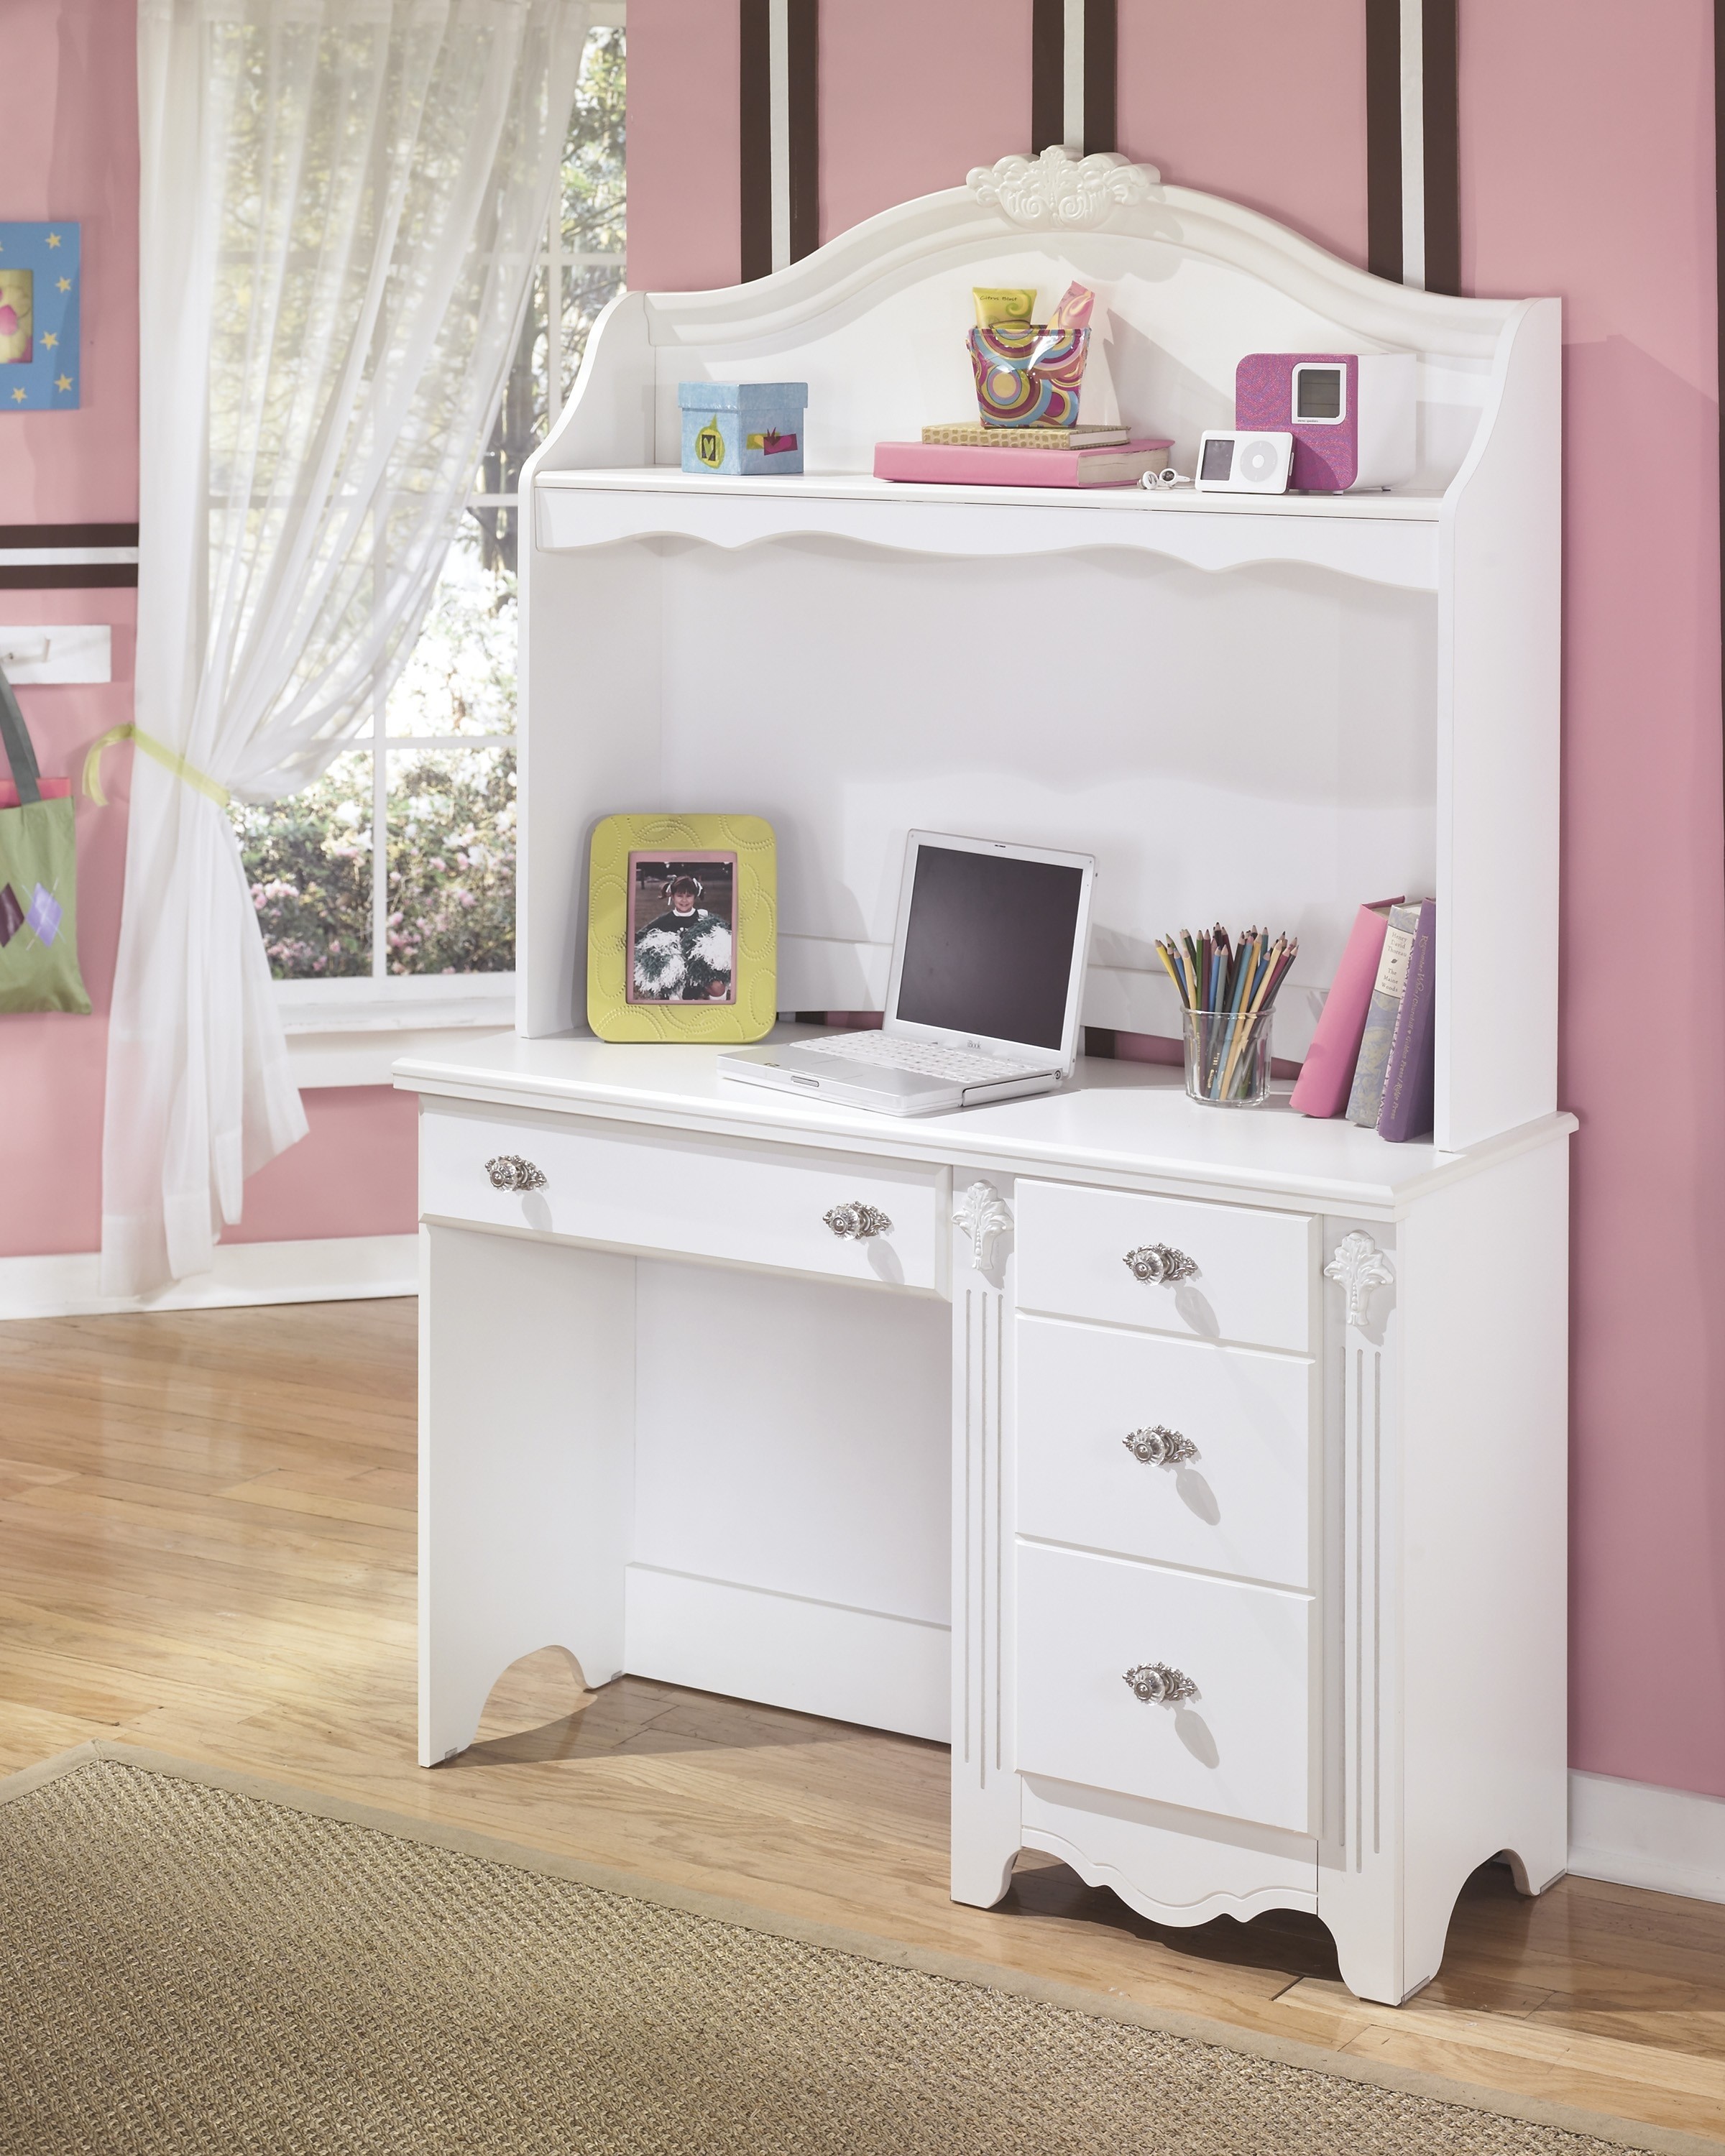 Furniture white bunk bed with desk for girls stylish